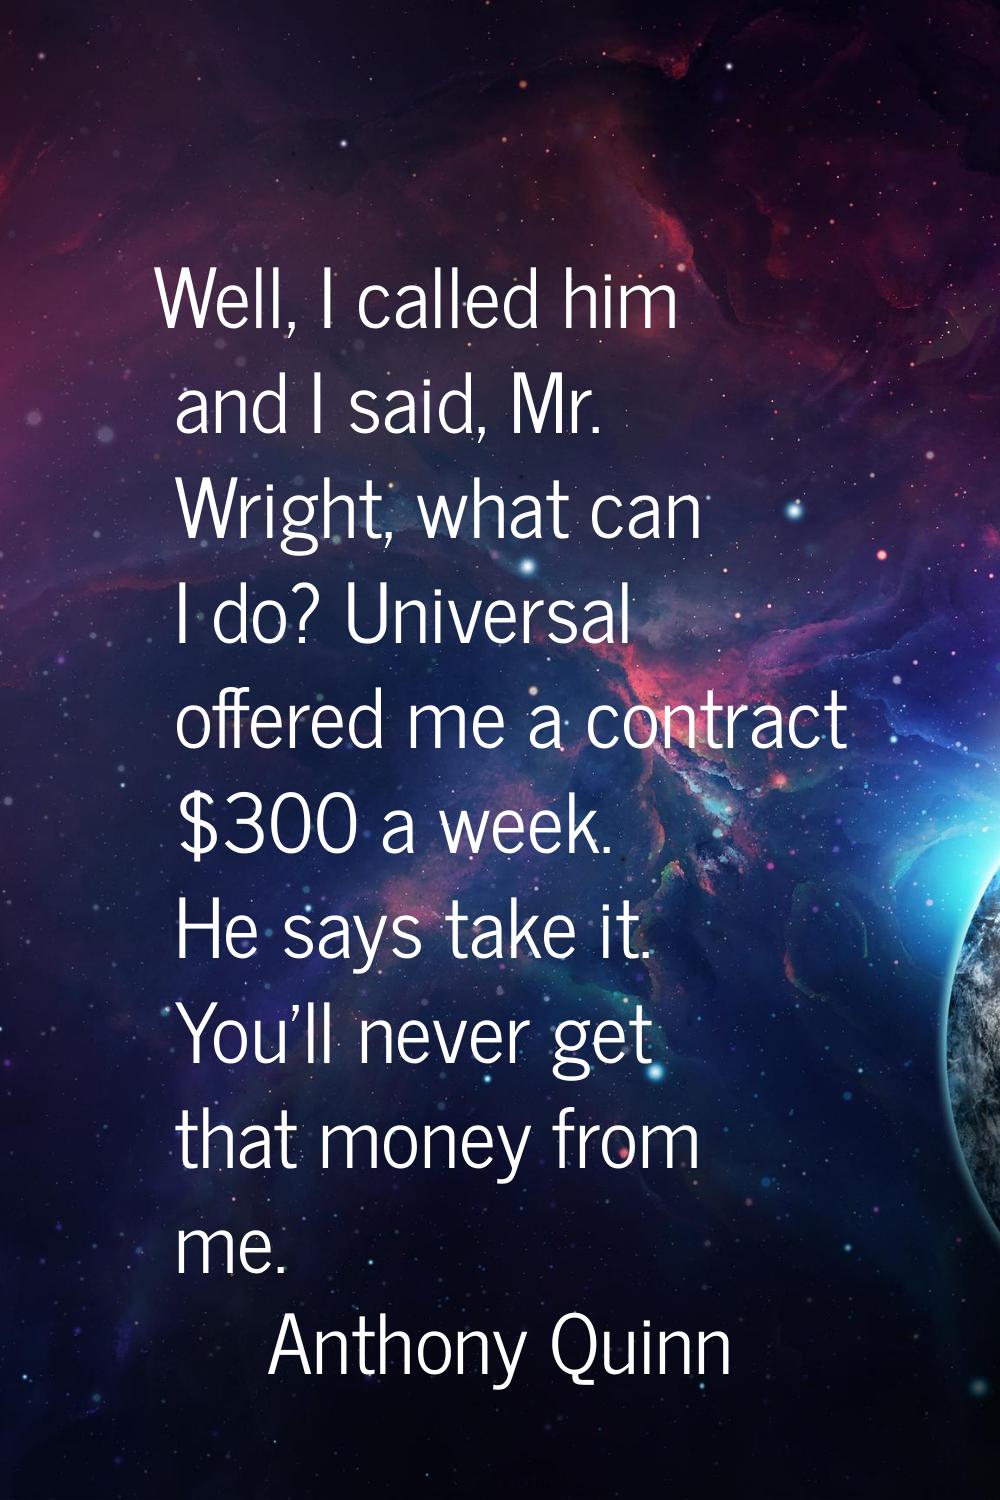 Well, I called him and I said, Mr. Wright, what can I do? Universal offered me a contract $300 a we